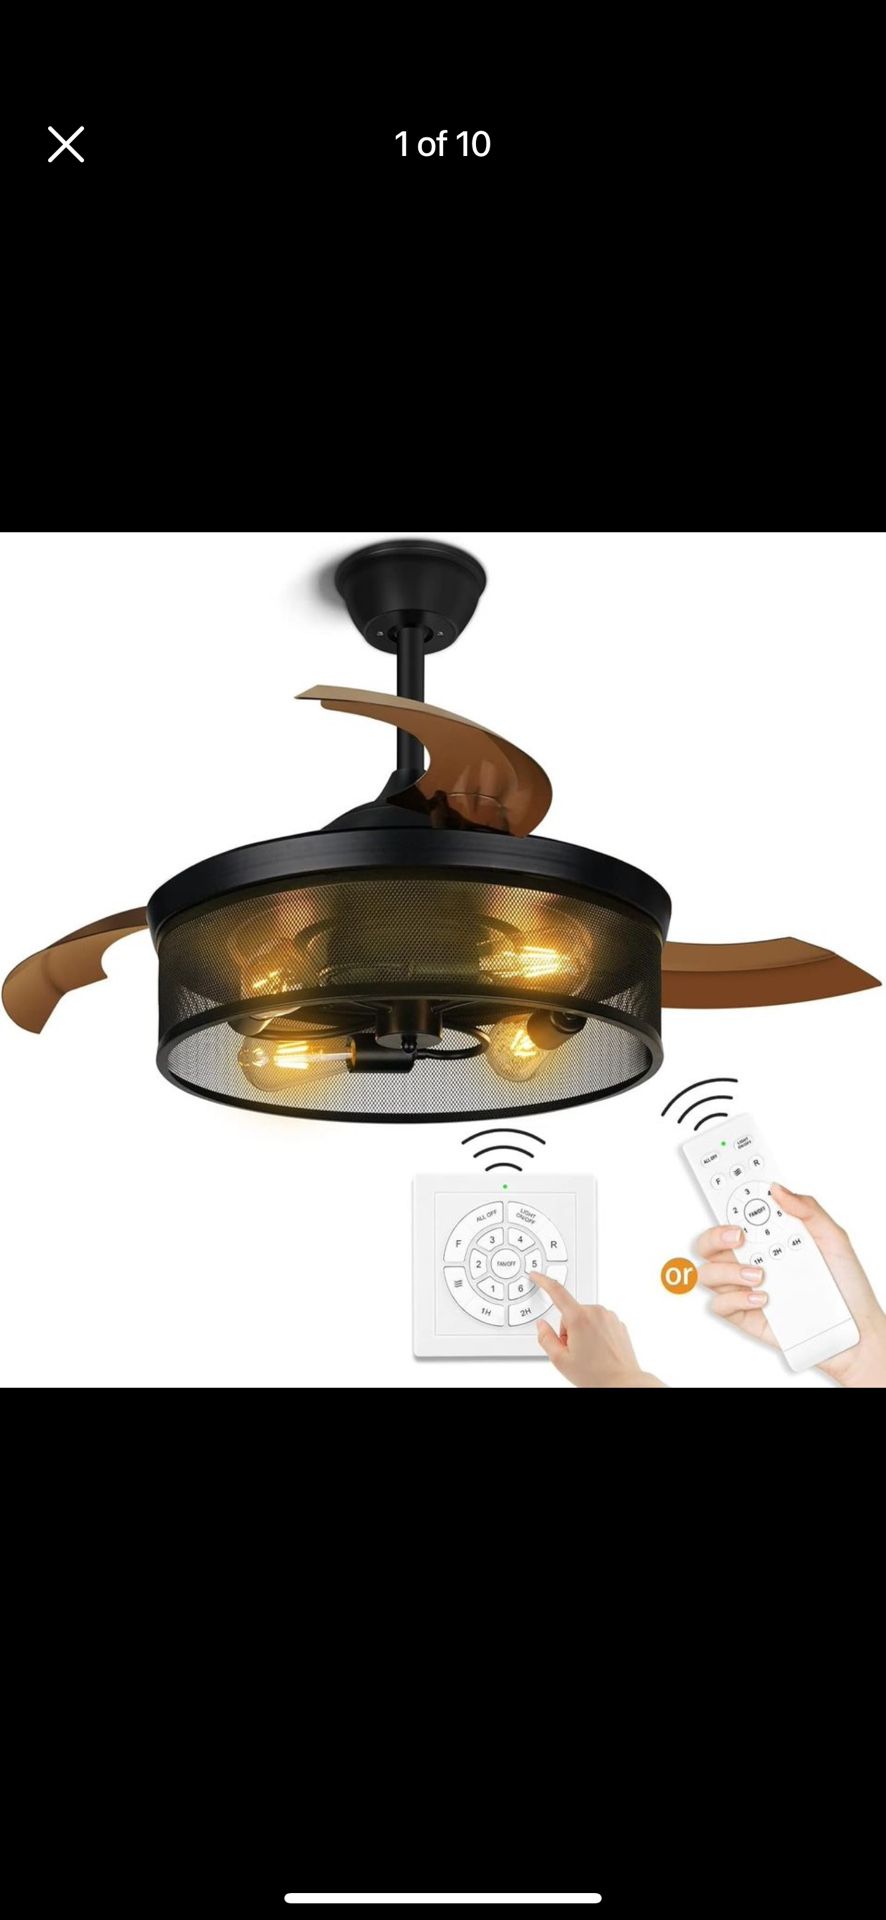 NEWORB 42 Inch Retractable Ceiling Fan with Lights and Remote